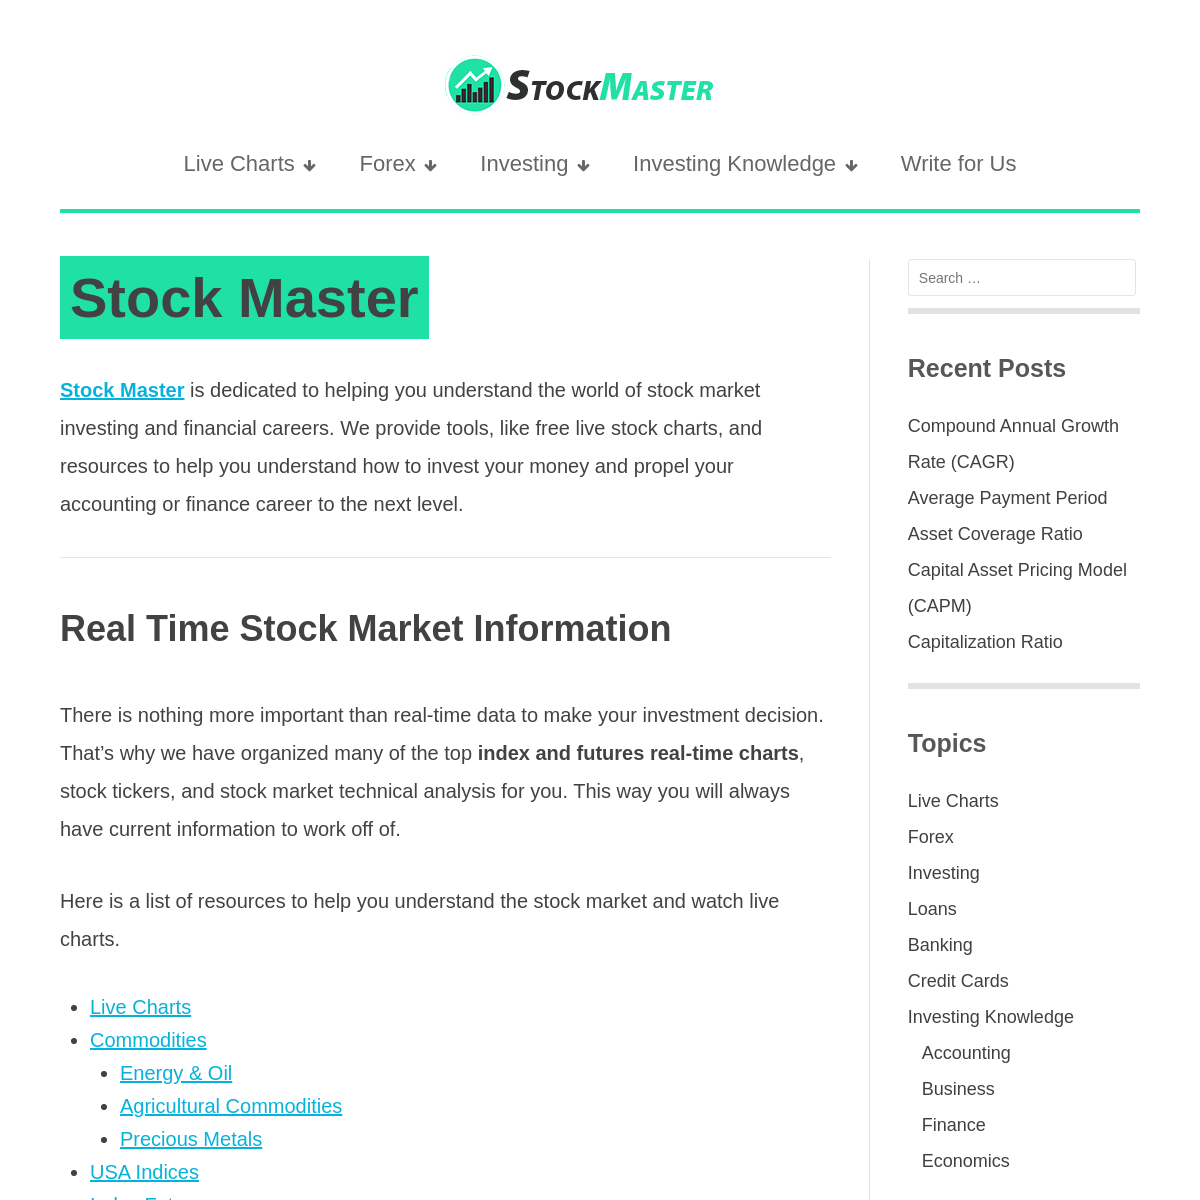 A complete backup of stockmaster.com